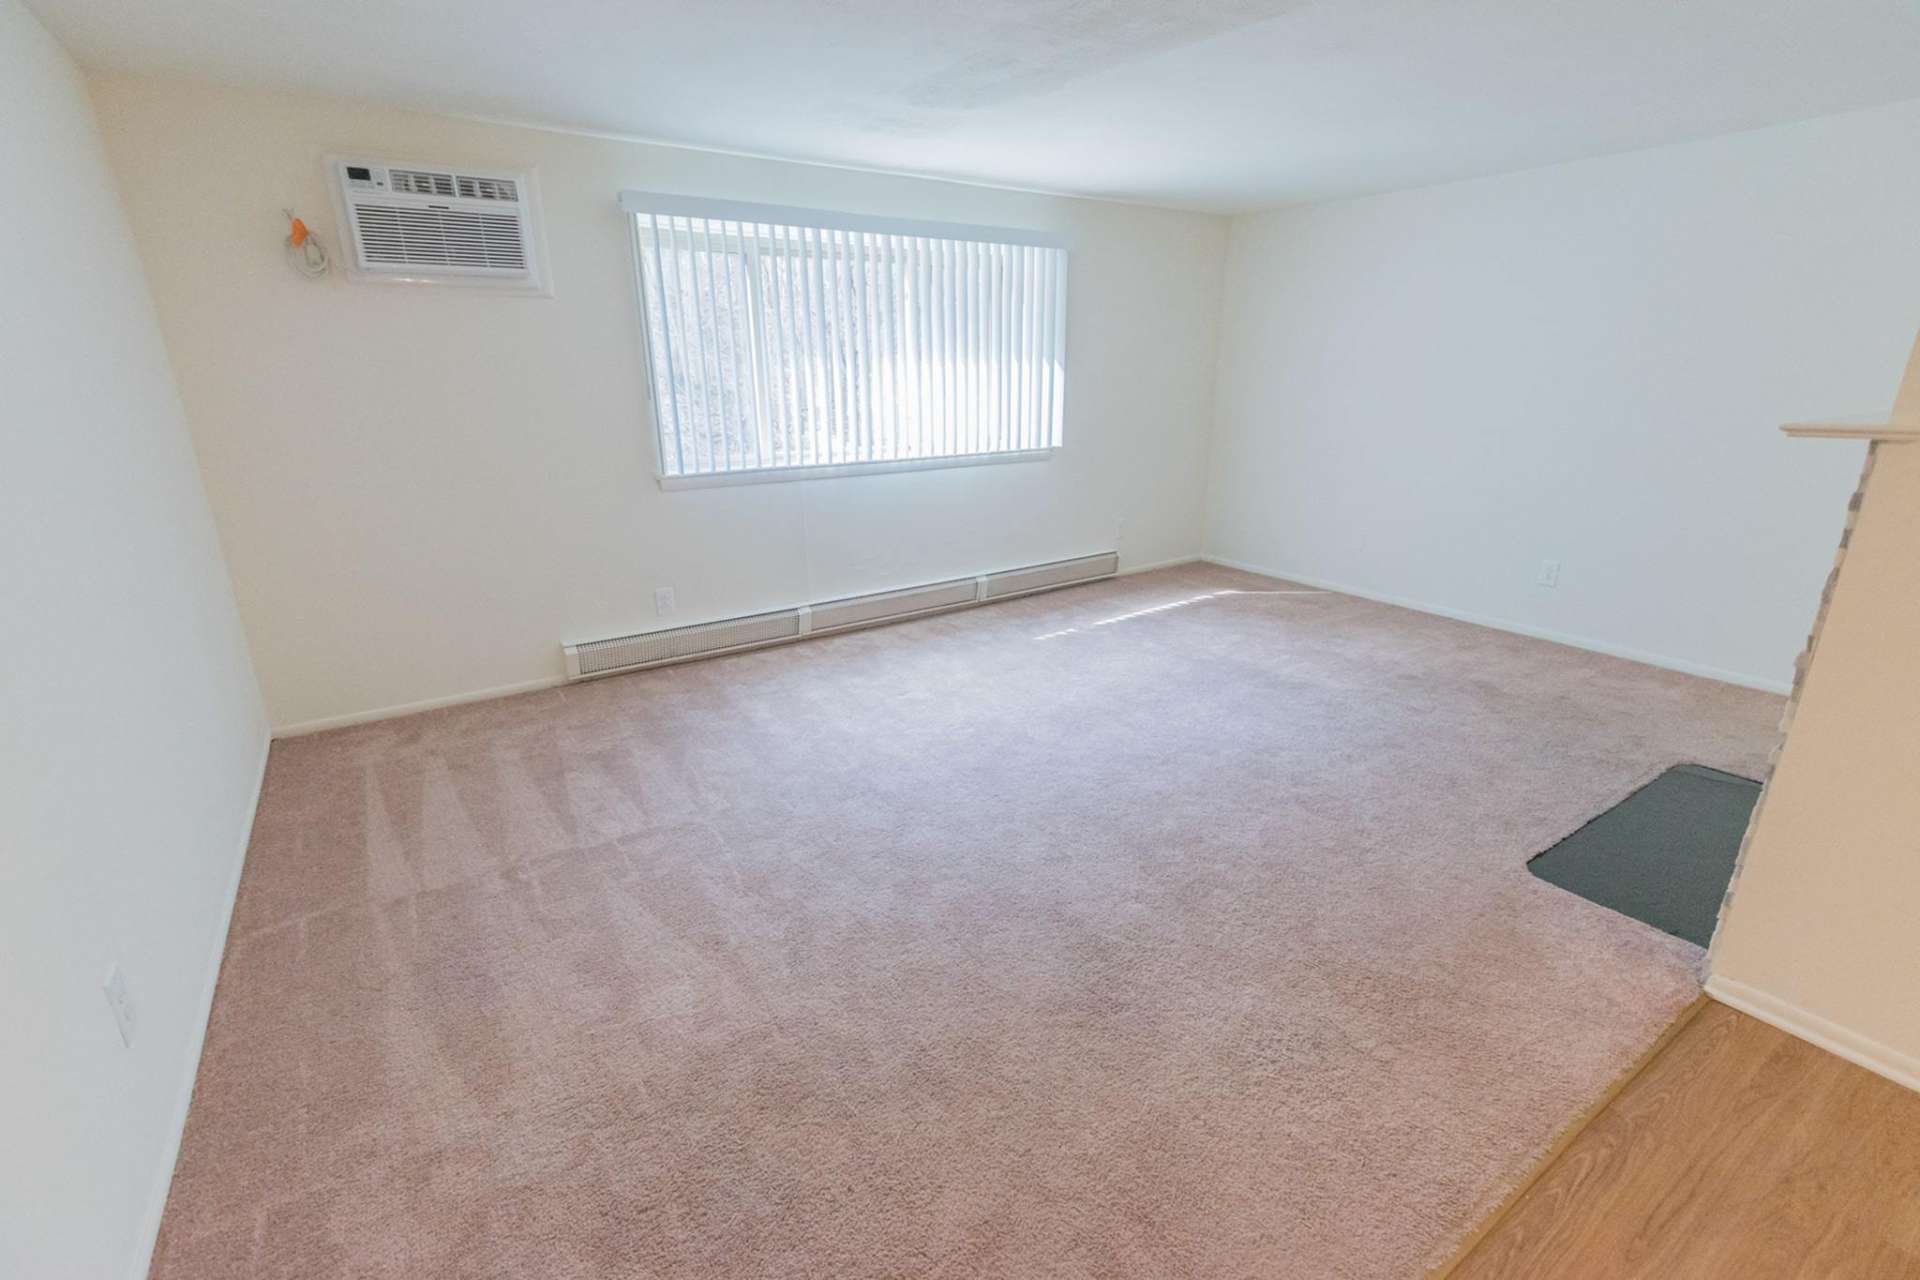 Living room space with light pink carpet and a large window in an apartment at Hollow Run.